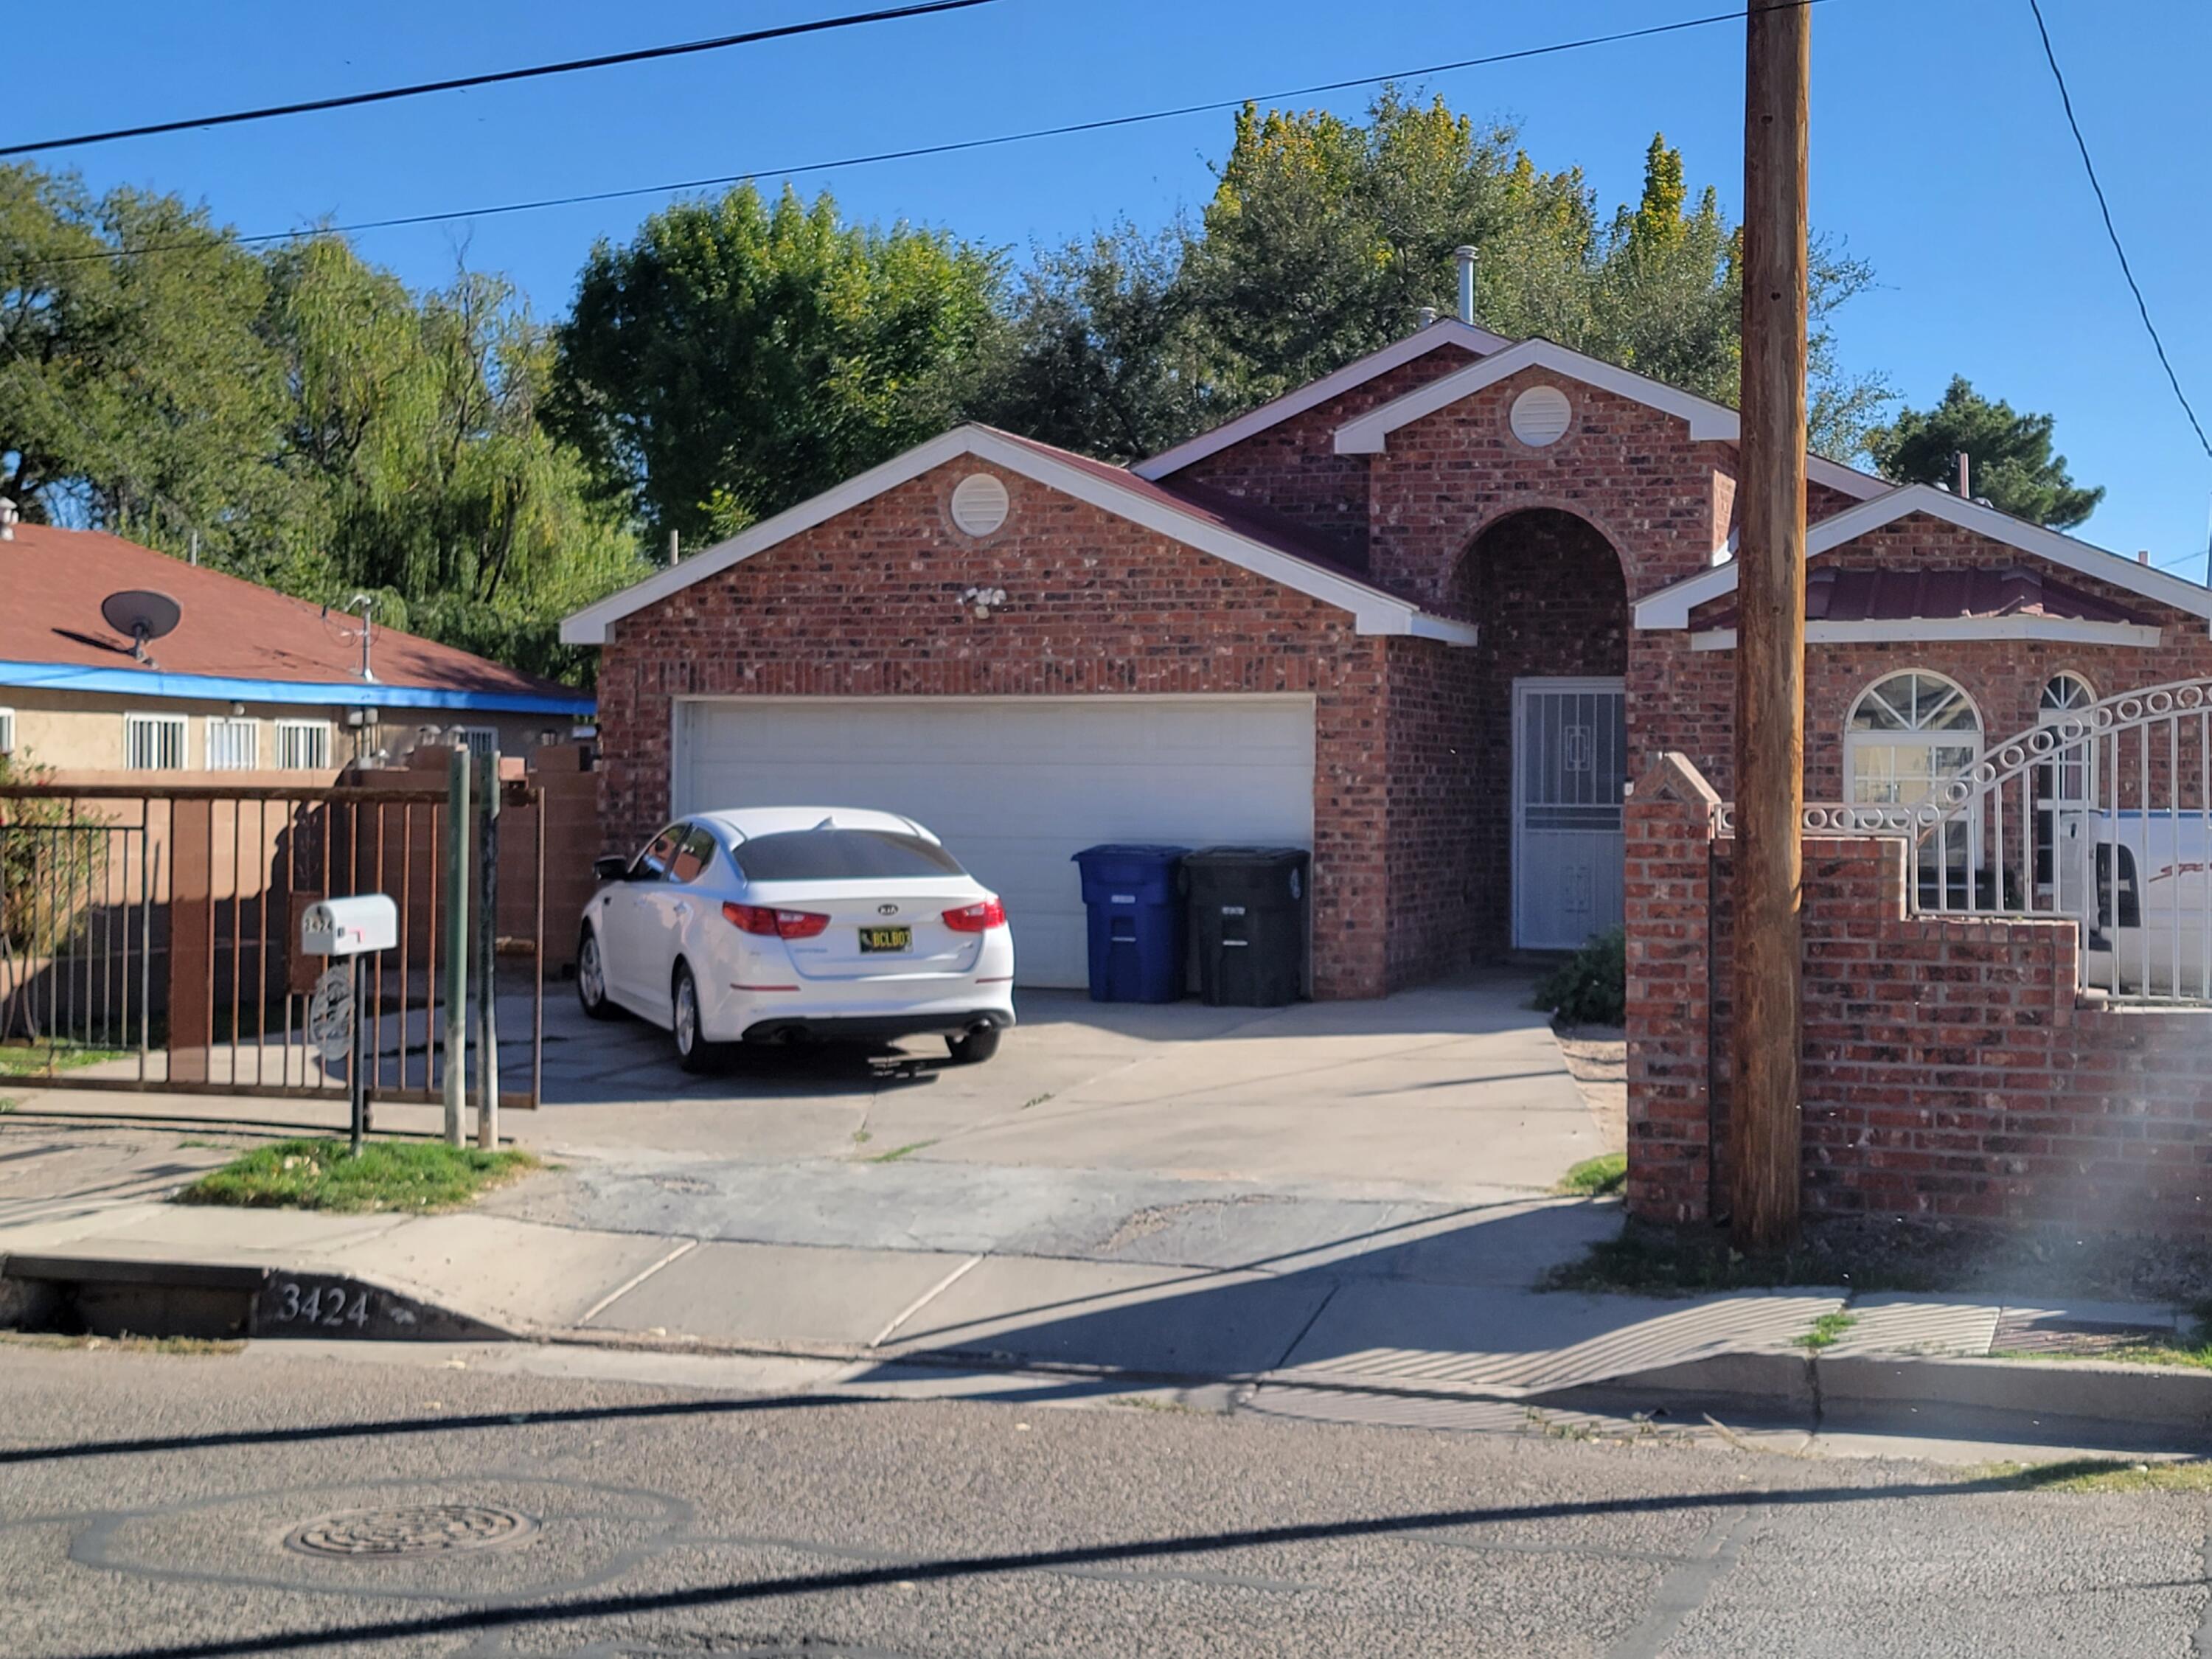 Nice custom built house in a quiet neighborhood. All brick facade, high ceilings, newer heating and cooling units. 3 Bdrs 1 3/4 baths. venetian plaster finish in the entry way !! Spacious kitchen, and large bedrooms. Nice backyard with access to the side street.